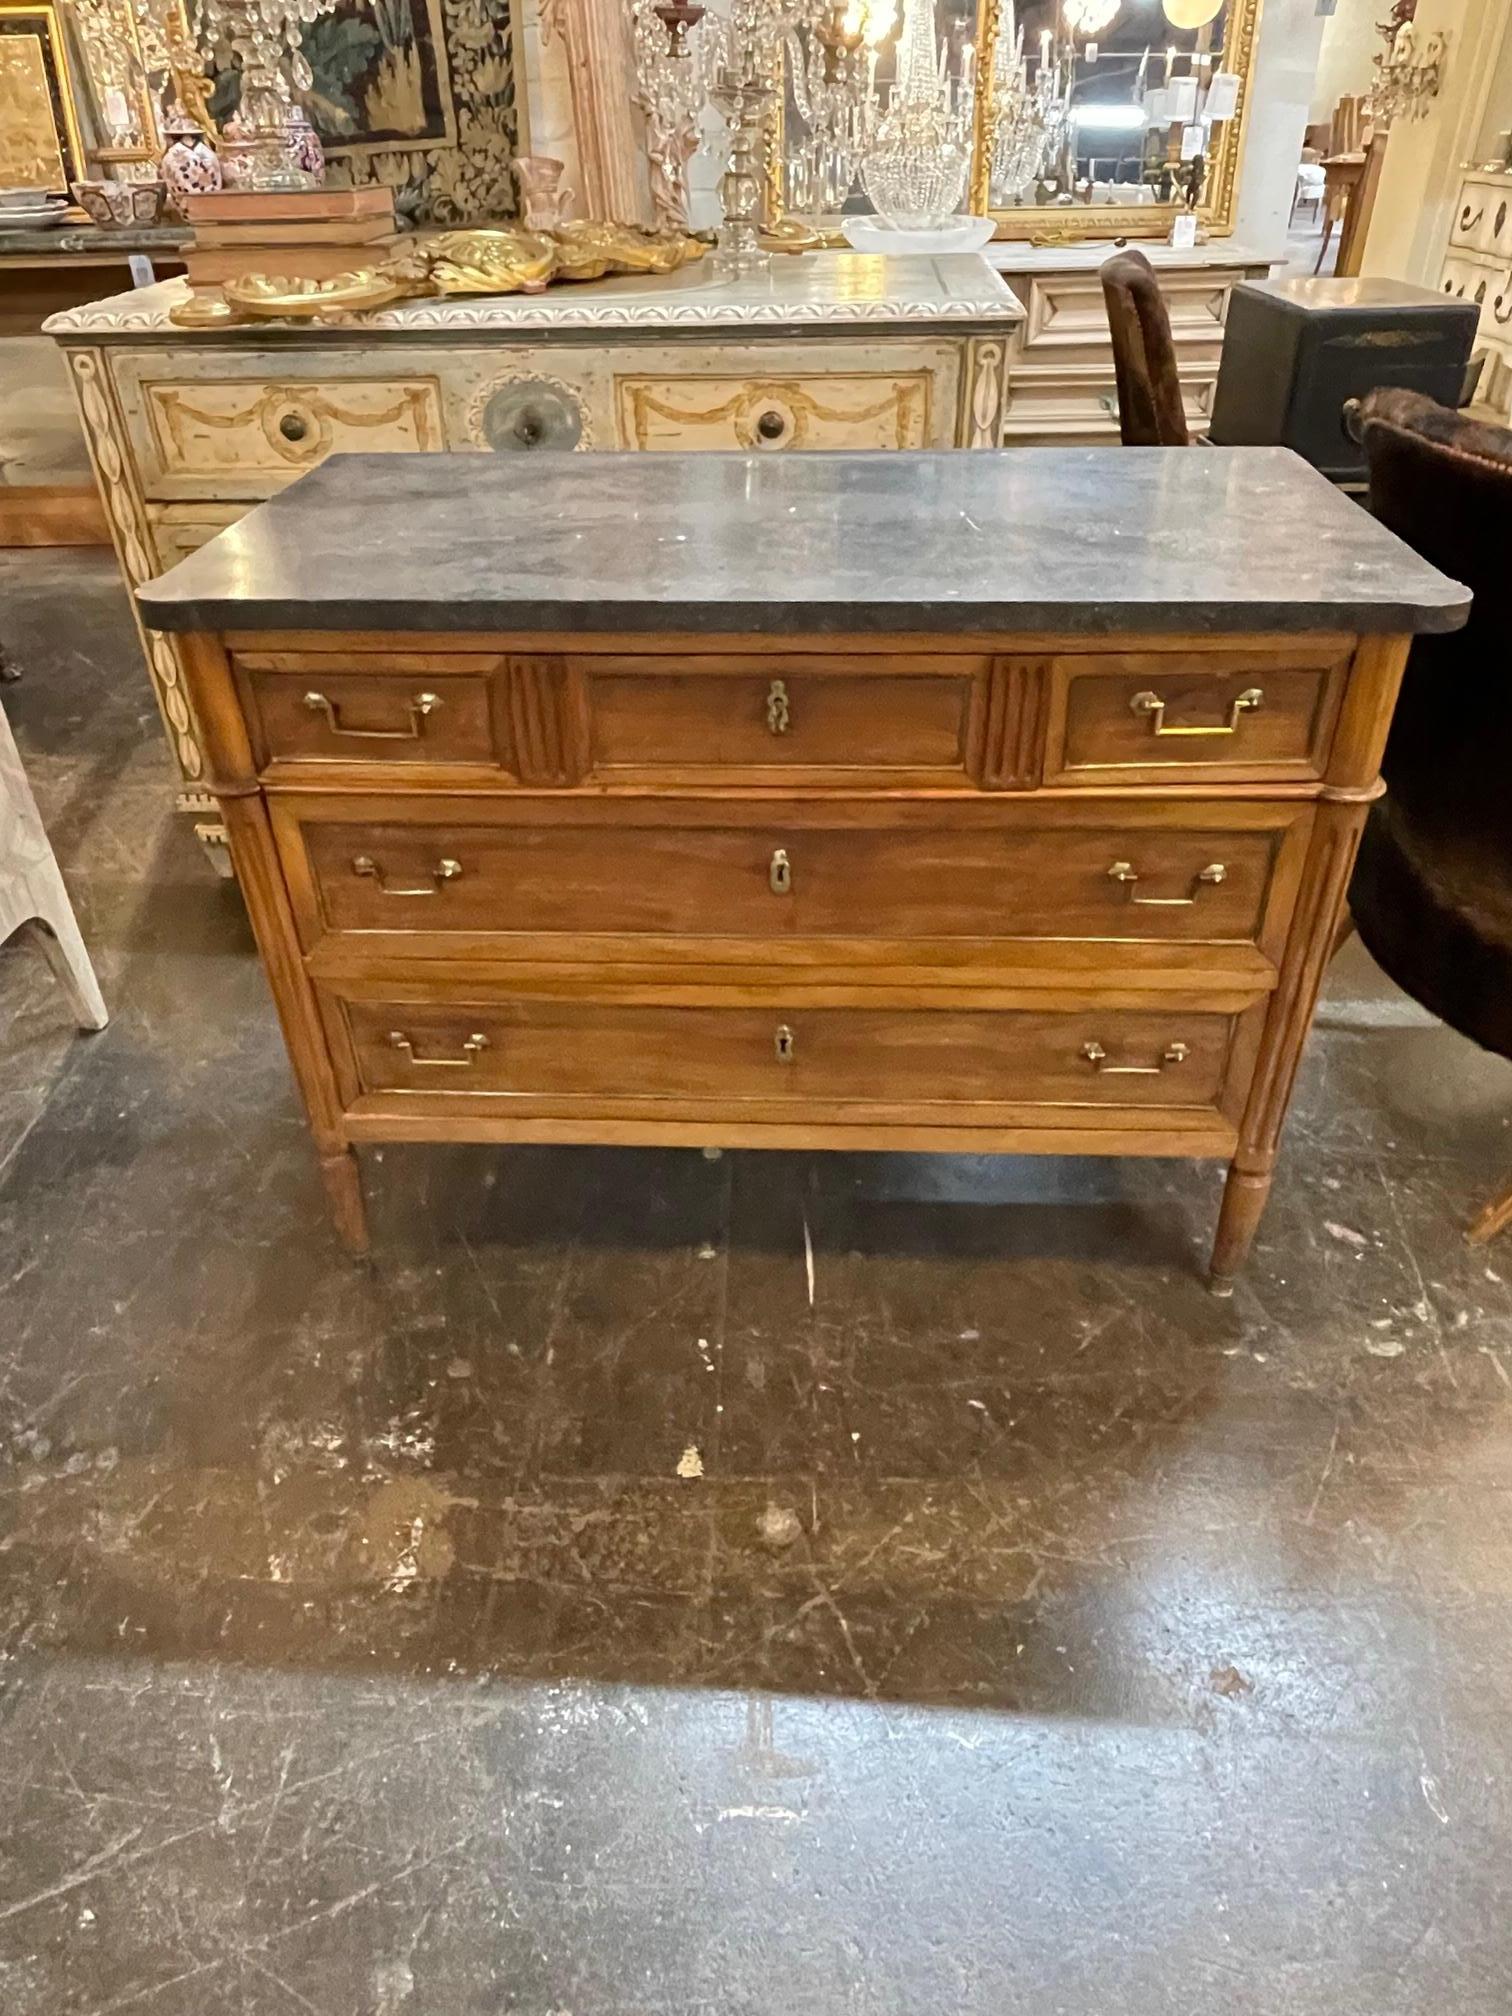 Very nice antique French DIrectoire style walnut commode with black Belgian marble top. Beautiful clean lines and 3 drawers for storage. A classic beauty!